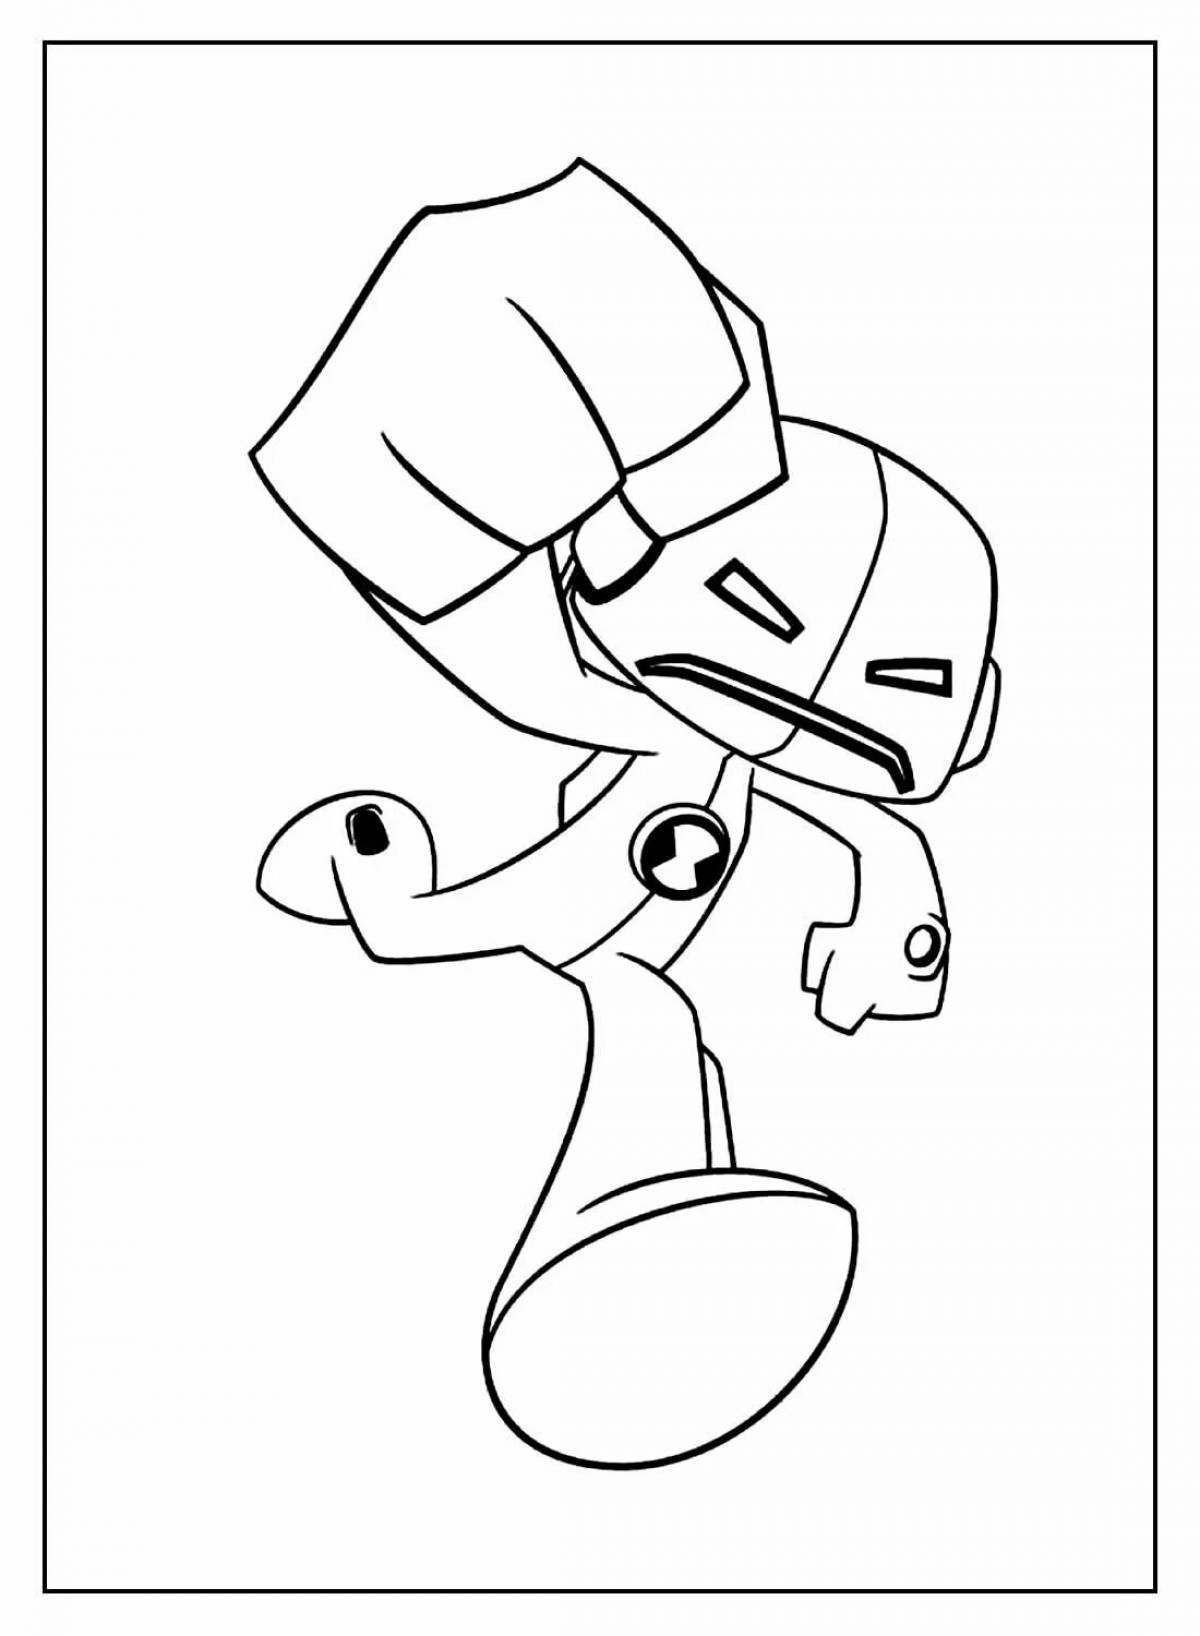 Animated echo coloring page